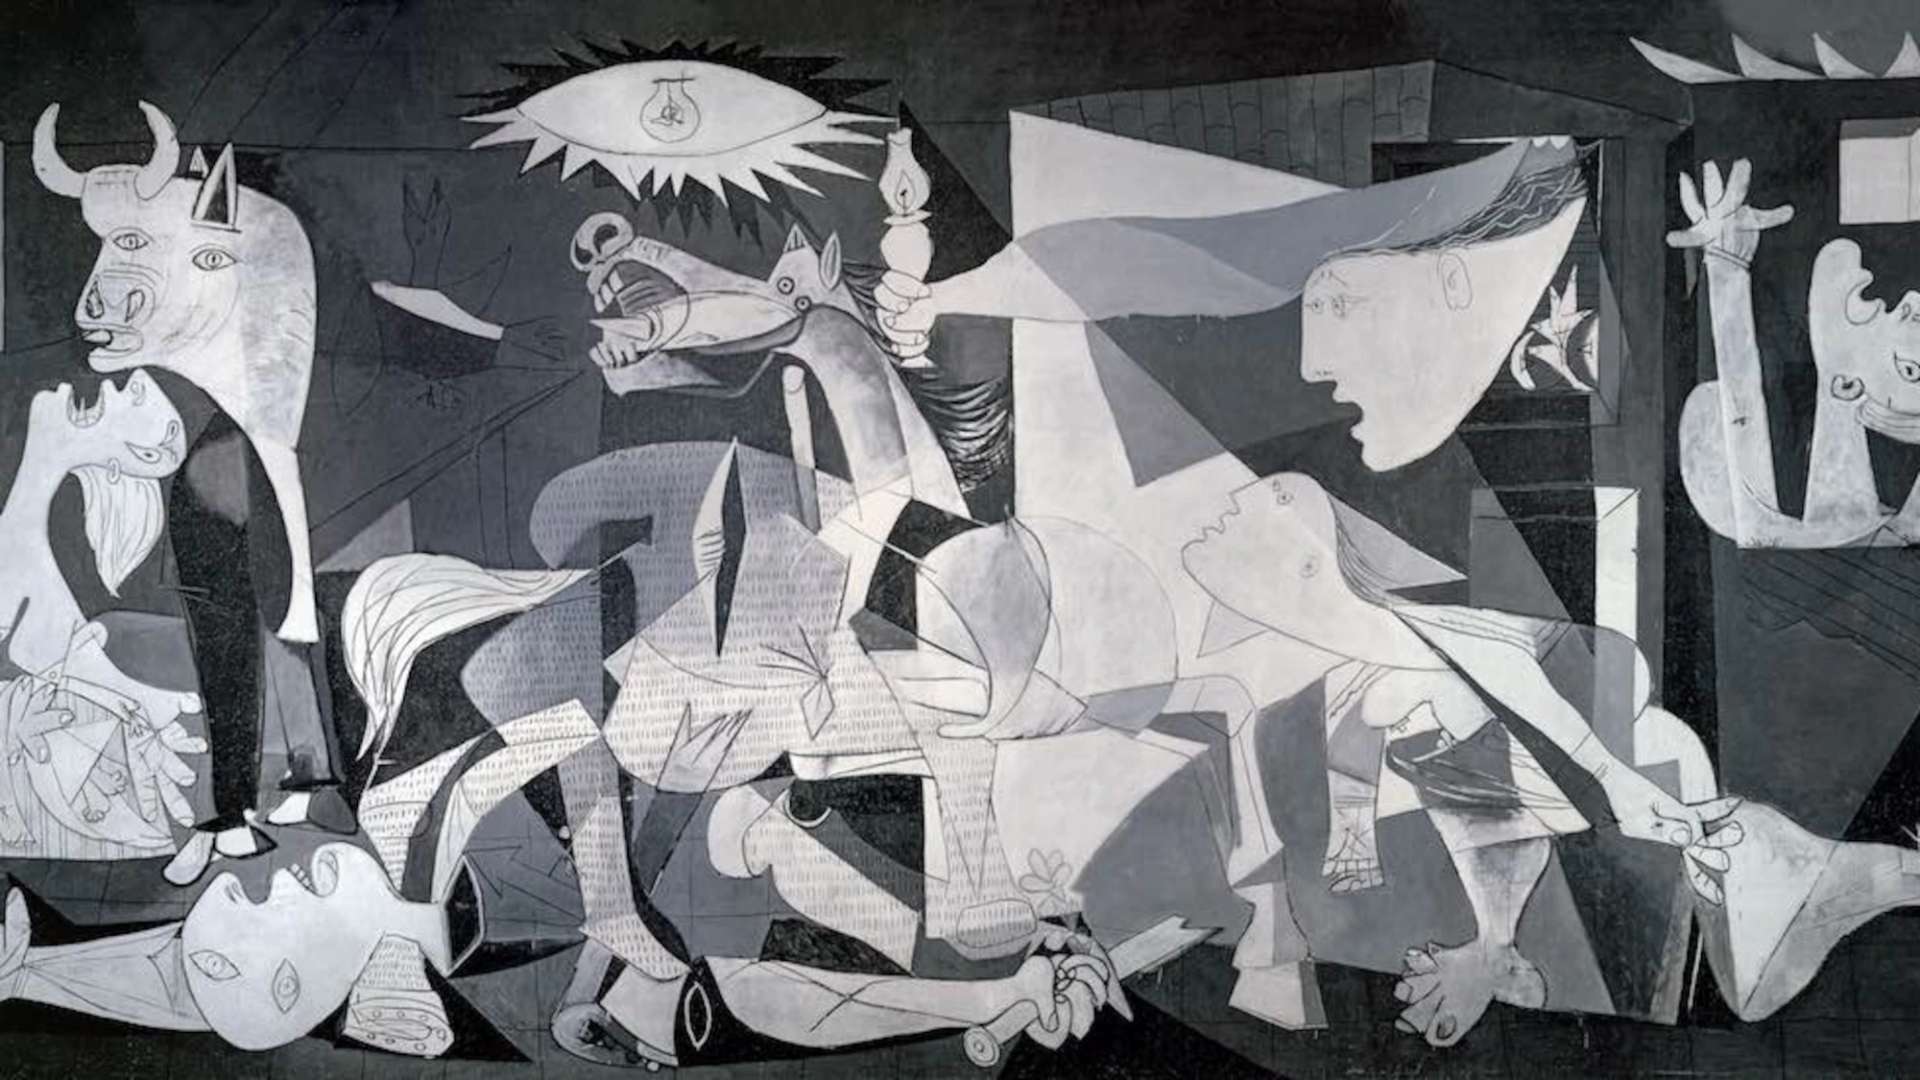 Large greyscale production of Picasso’s Guernica including animals and figurative objects